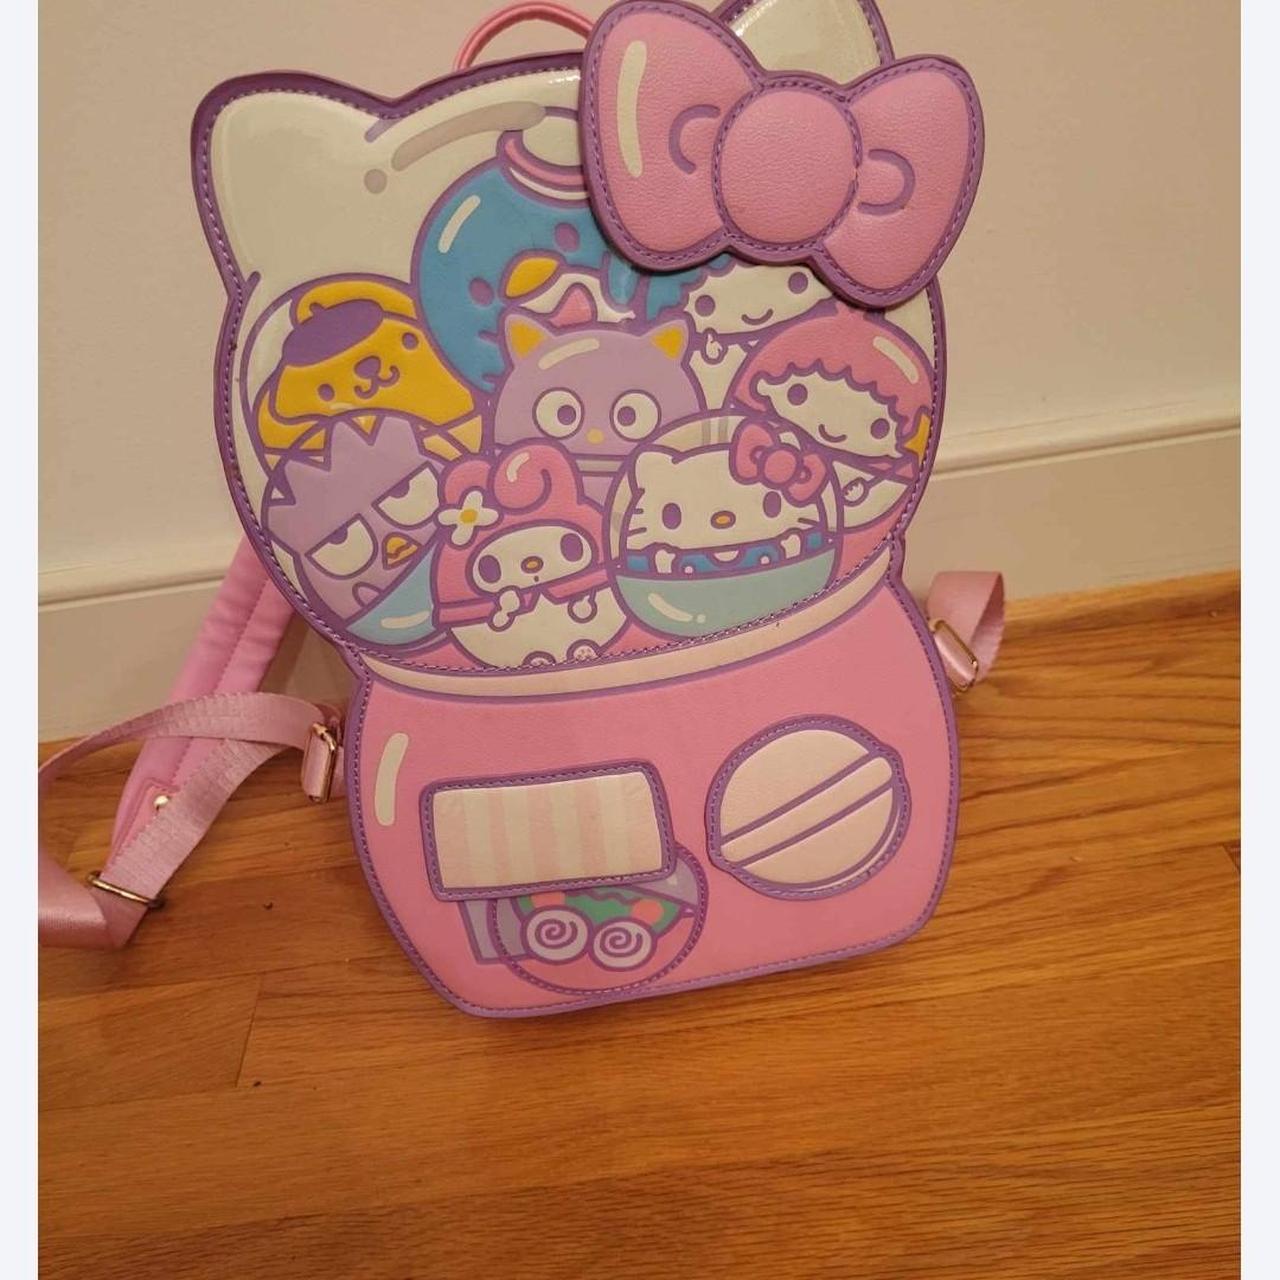 BRAND NEW without tags hello kitty Sanrio x... - Depop